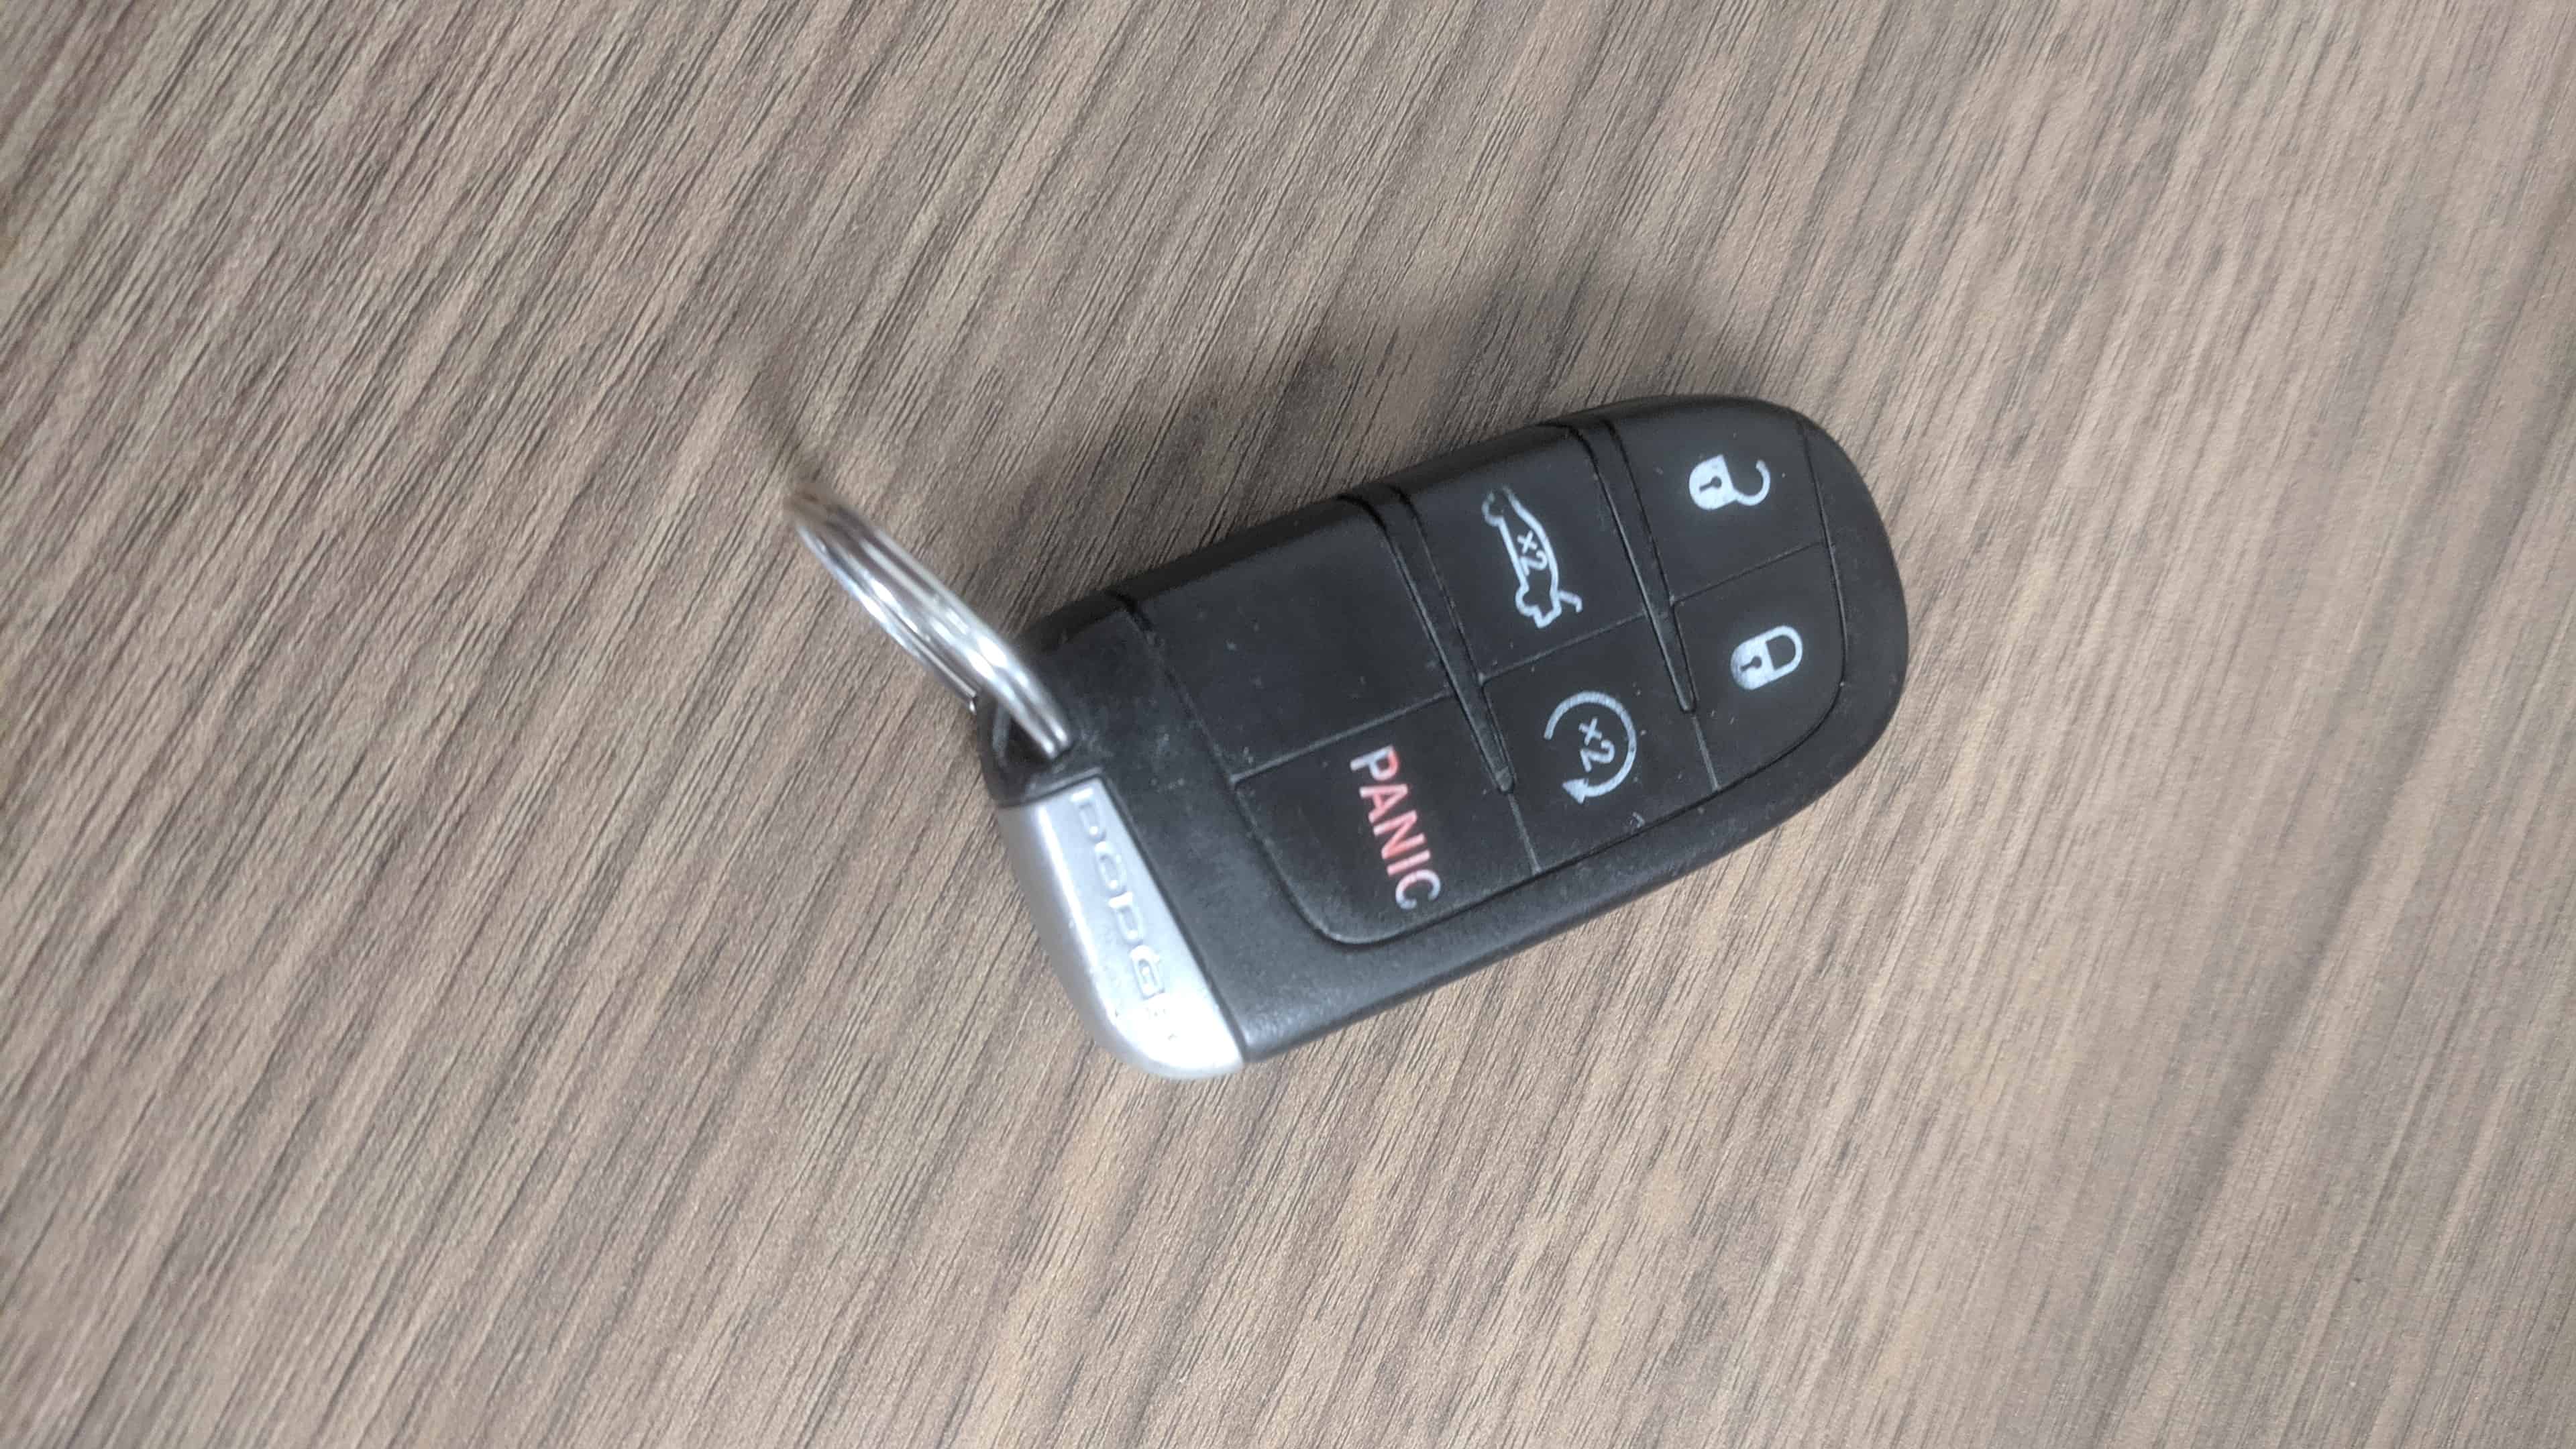 How To Start Dodge Charger If Key Fob Is Dead